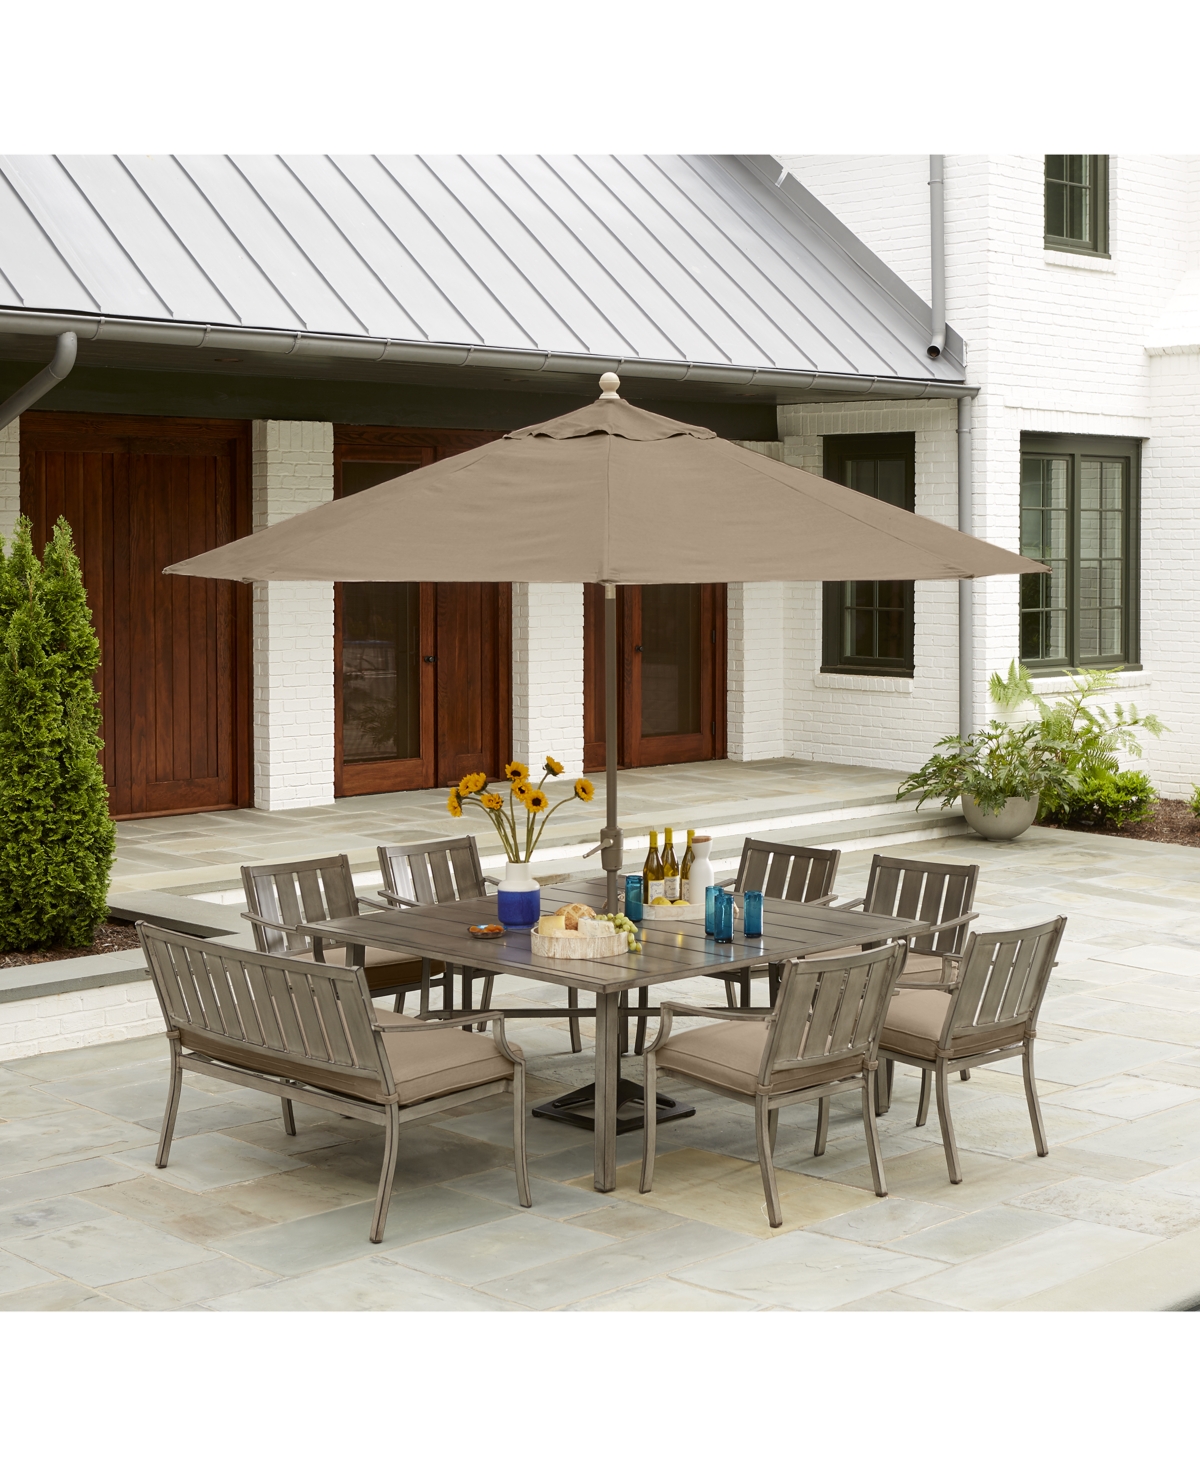 Agio Wayland Outdoor Aluminum 8-pc. Dining Set (64" Square Dining Table, 6 Dining Chairs & 1 Bench), Crea In Outdura Remy Pebble